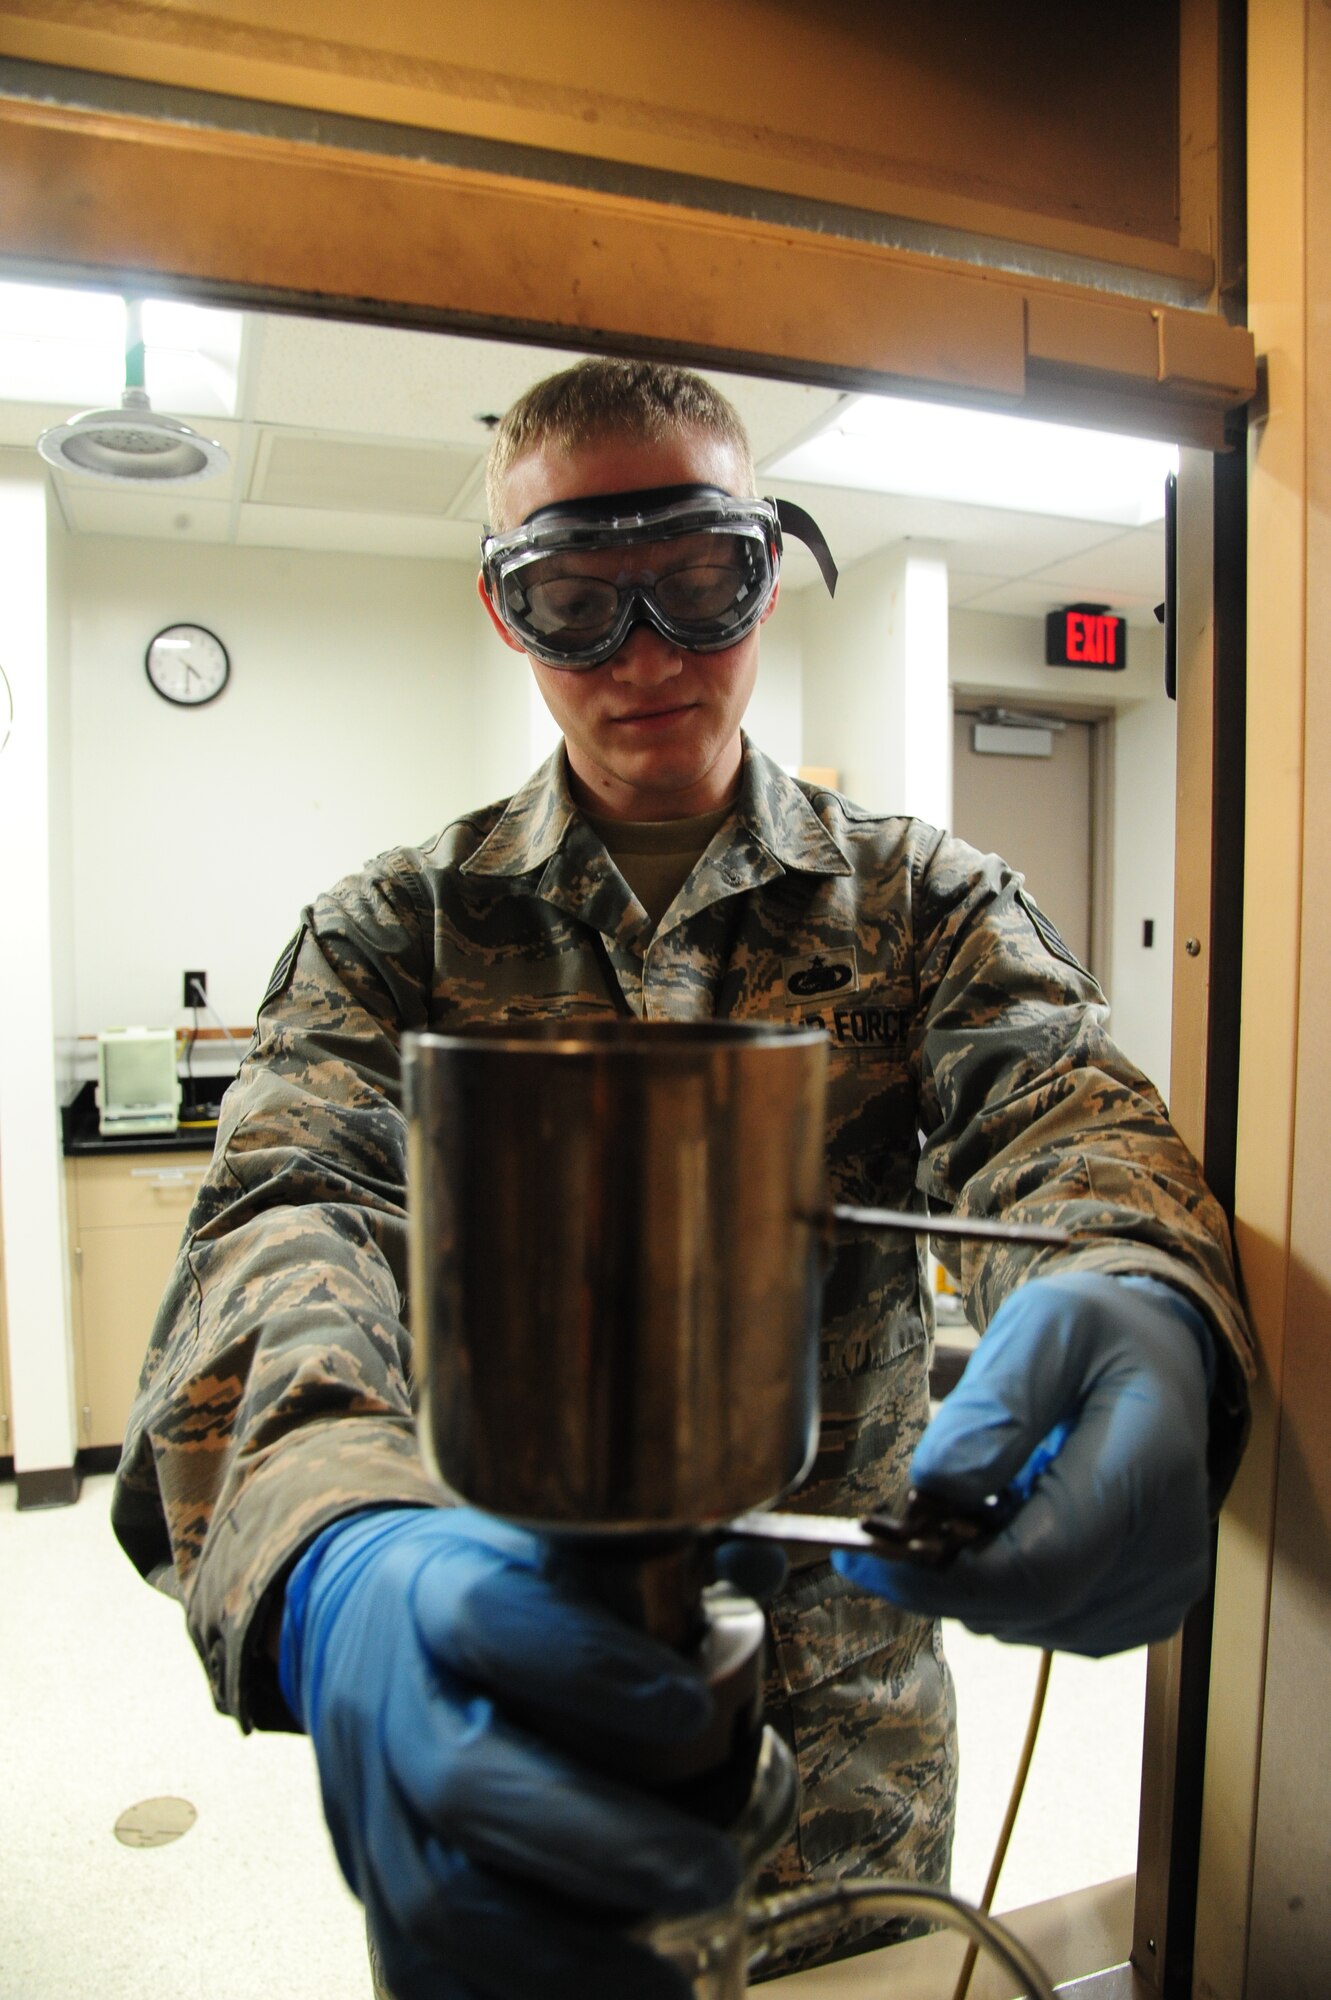 U.S. Air Force Staff Sgt. Nicholas Flamm, a 509th Logistics Readiness Squadron fuels service center operator, performs fuel testing at Whiteman Air Force Base, Mo., Nov. 3, 2015. The testing process ensures the fuel is filtered properly and potential contaminants do not settle to the bottom of the container. (U.S. Air Force photo by Senior Airman Keenan Berry)